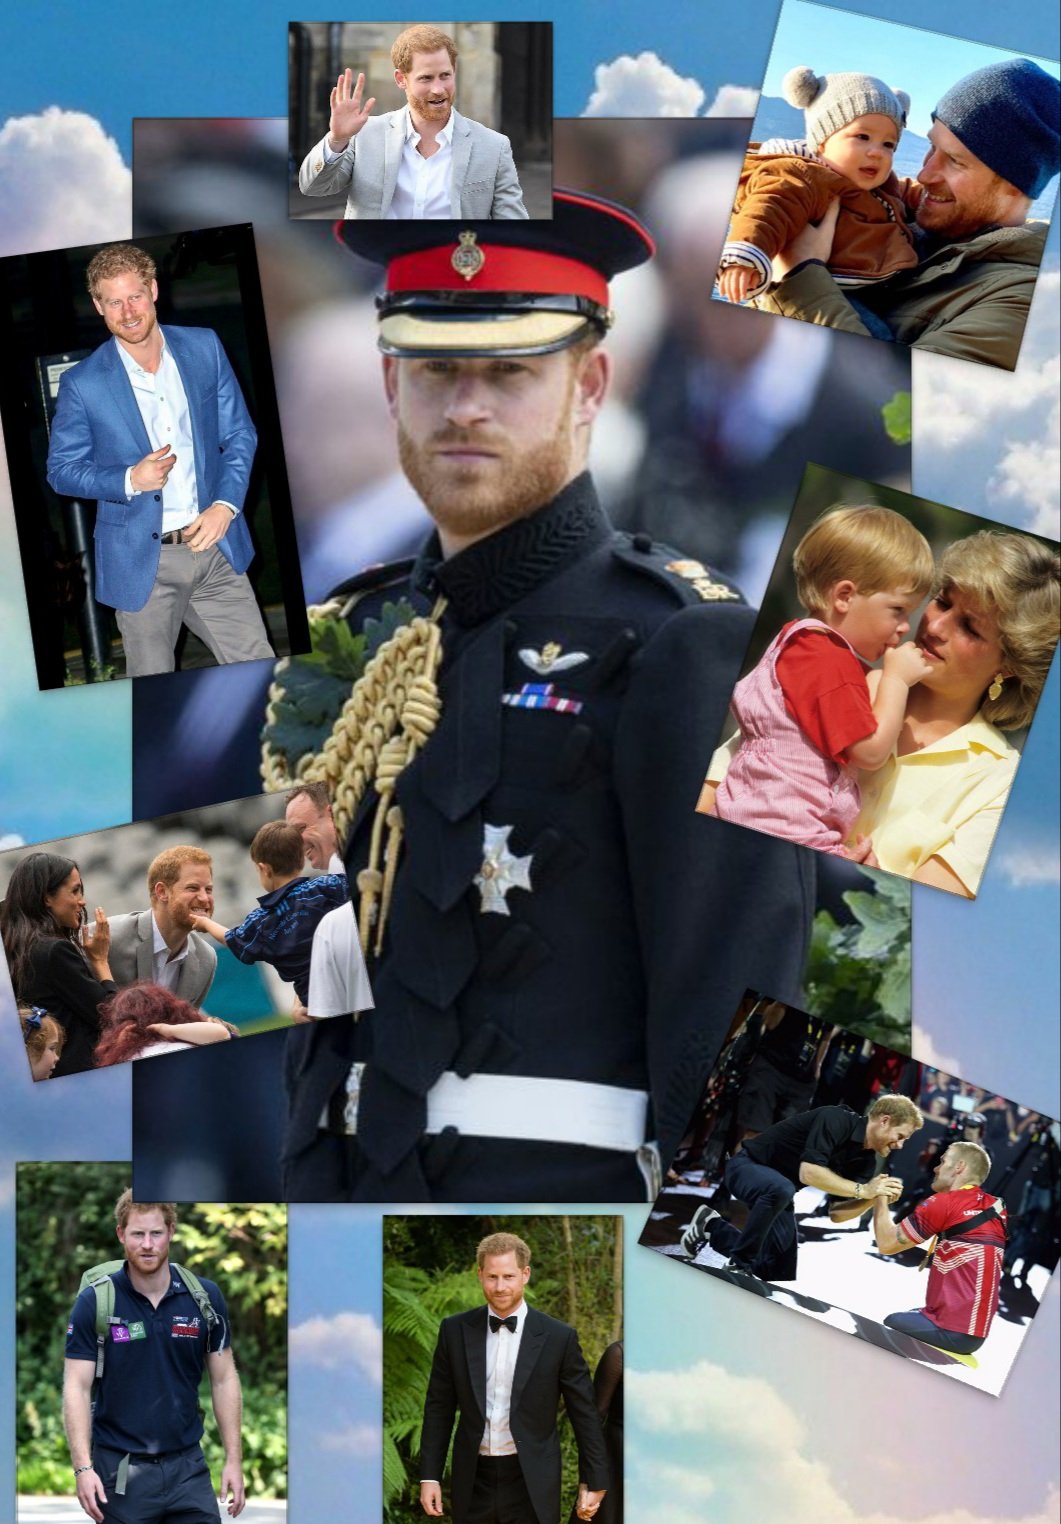 Happy Birthday Prince Harry! The WORLD loves and supports you. 